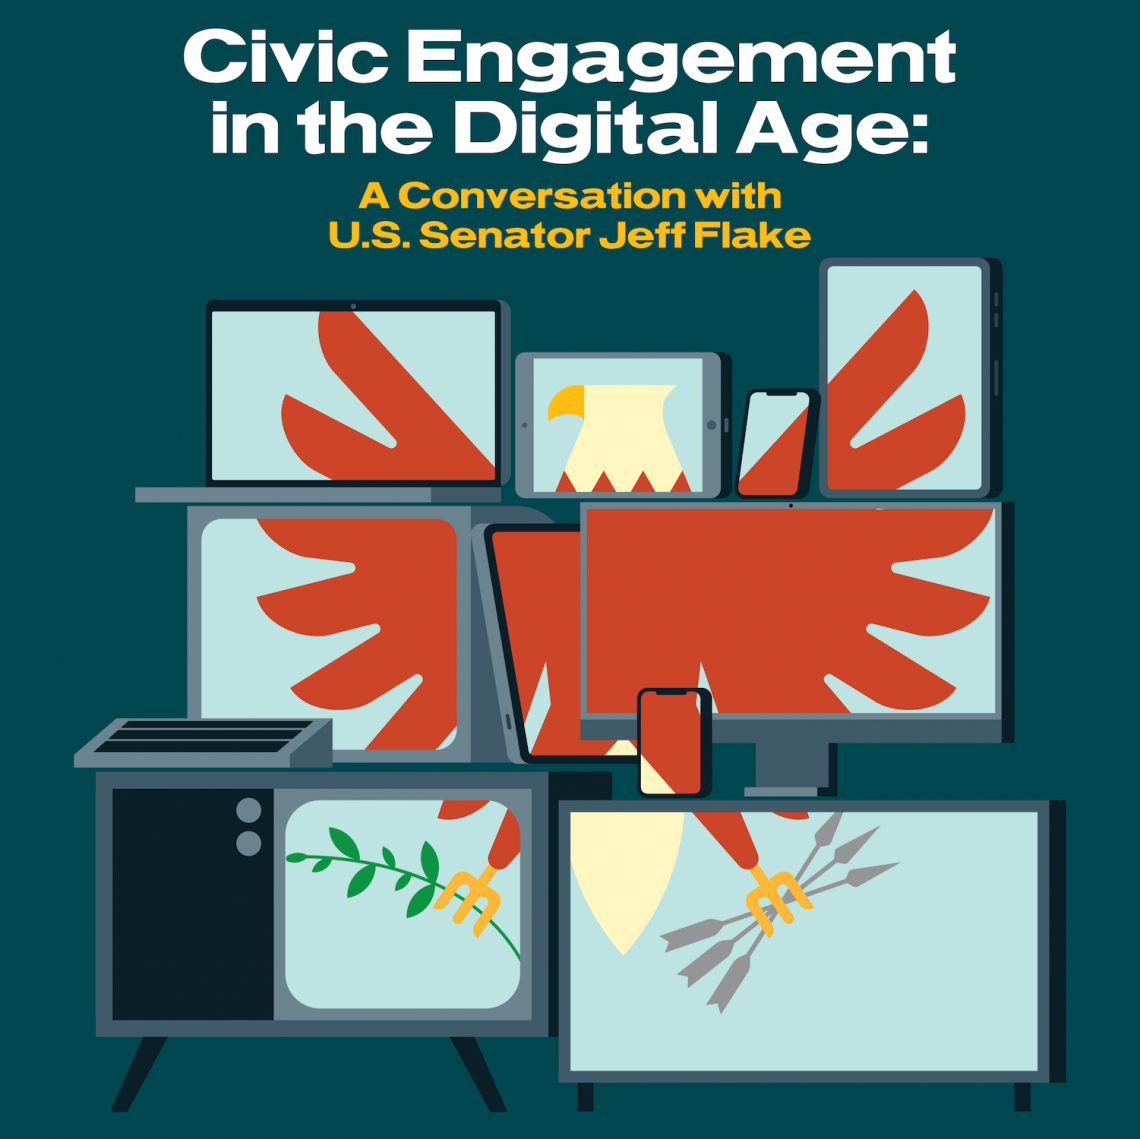 Civic Engagement in the Digital Age: A Conversation with U.S. Senator Jeff Flake